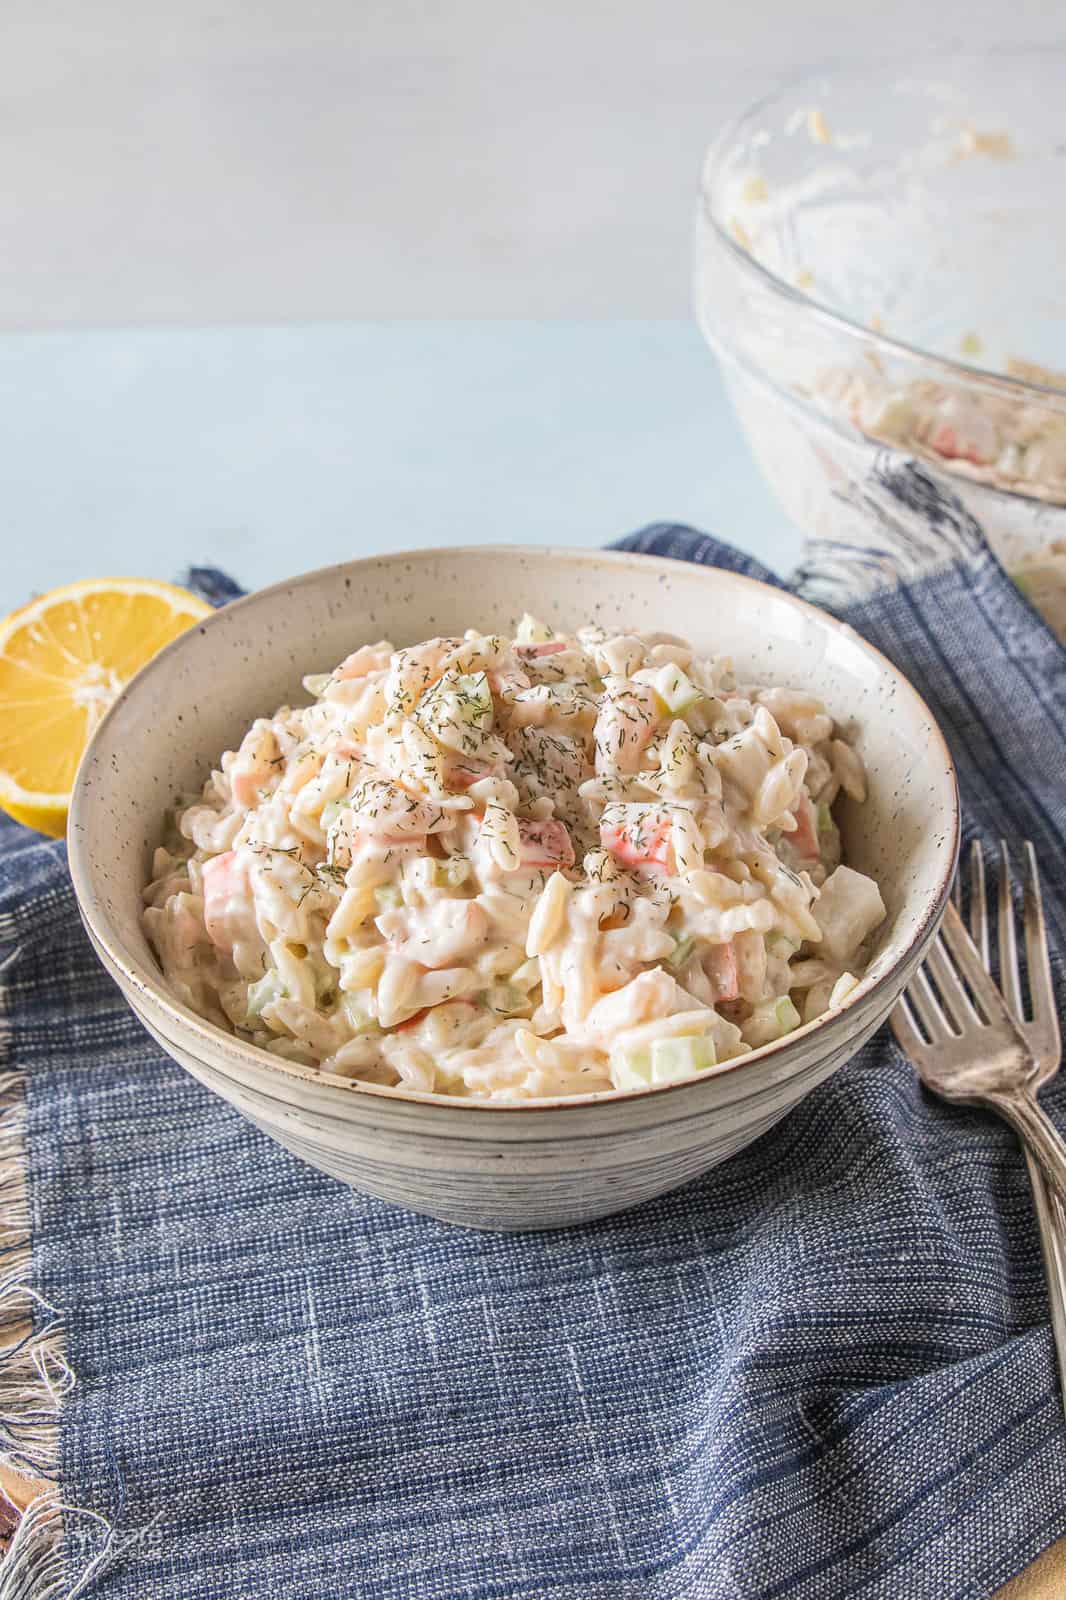 Seafood salad with orzo pasta in a bowl.